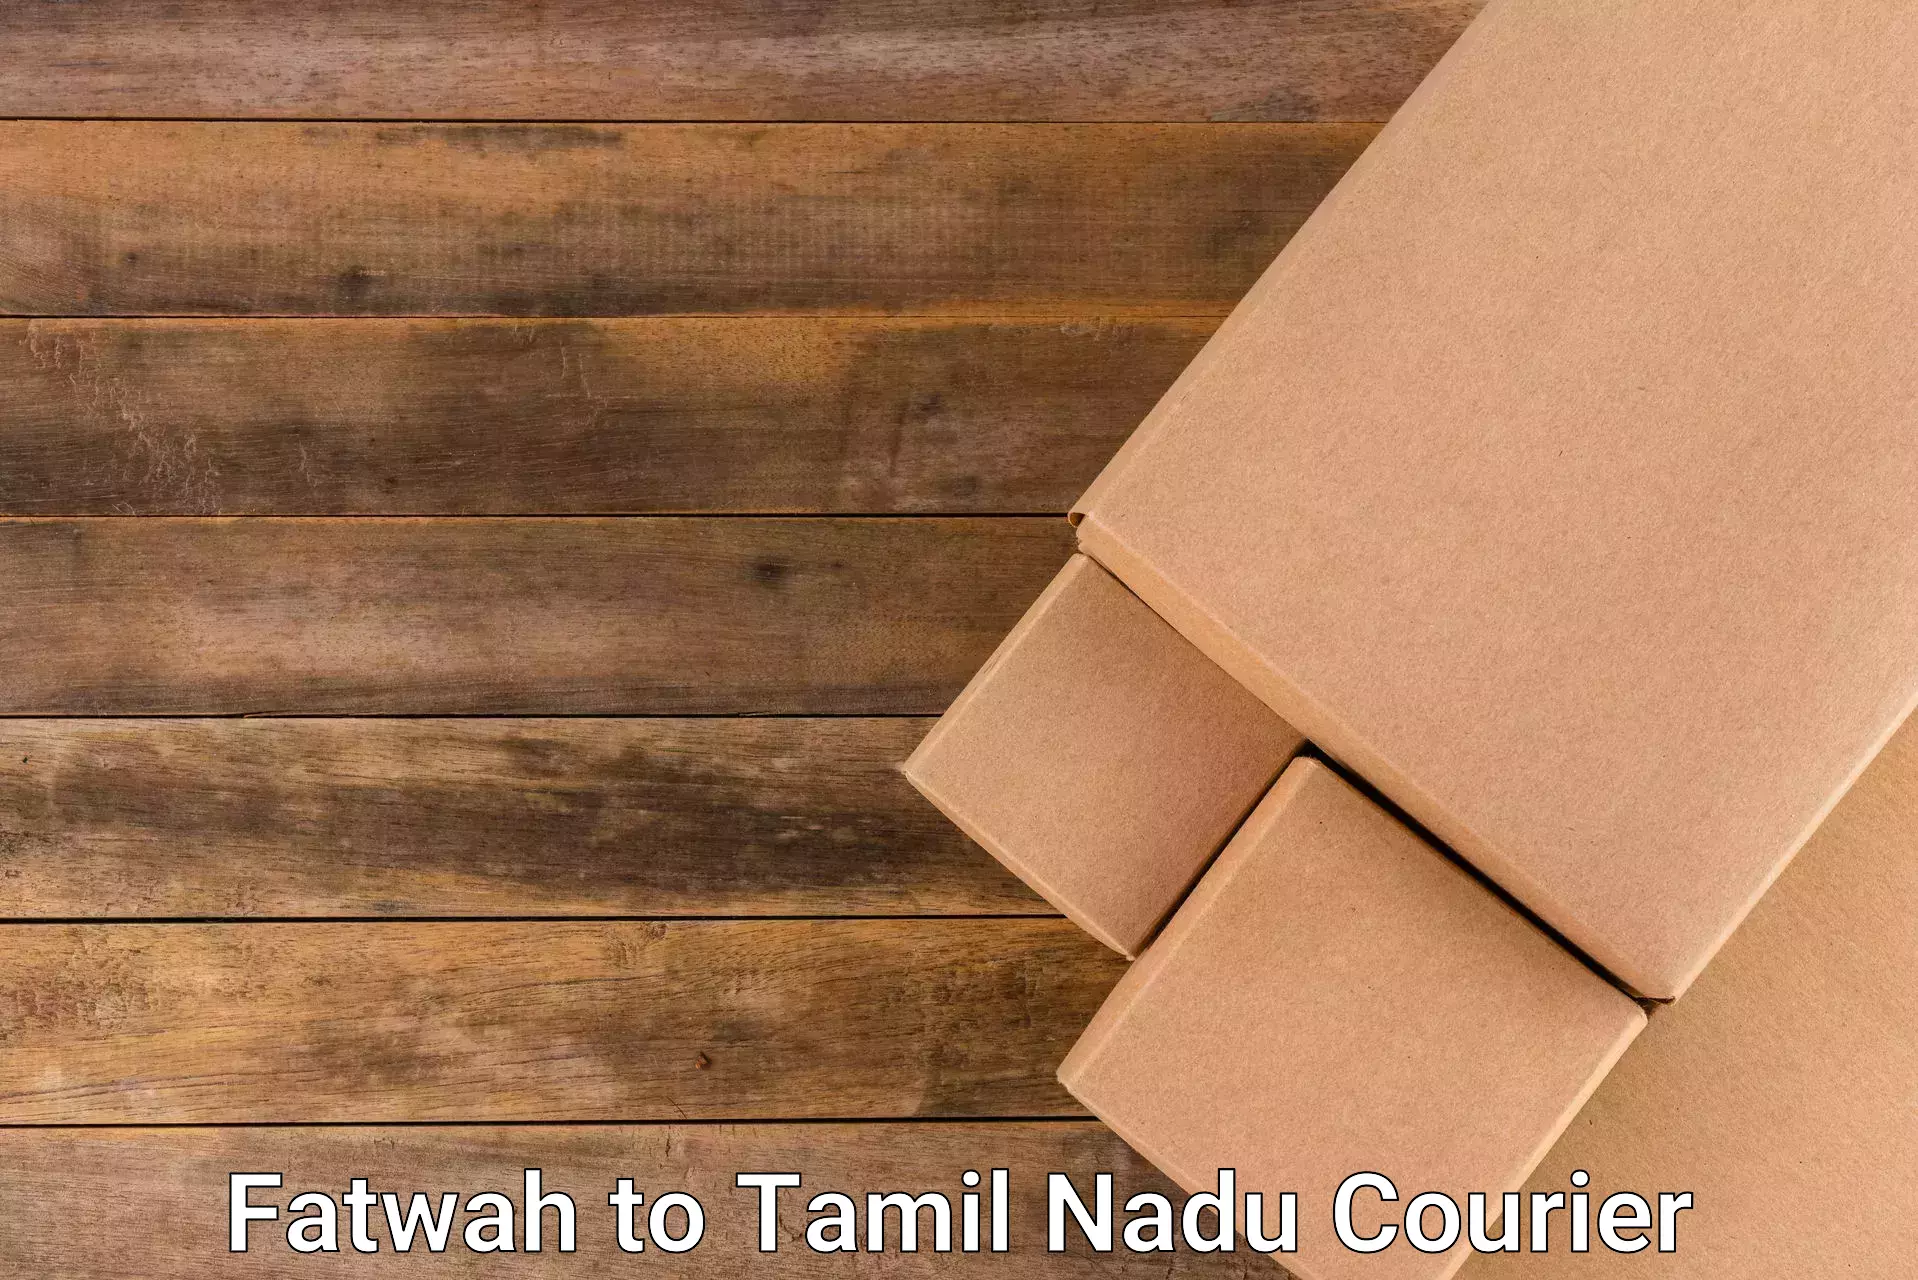 Sustainable delivery practices Fatwah to Tamil Nadu